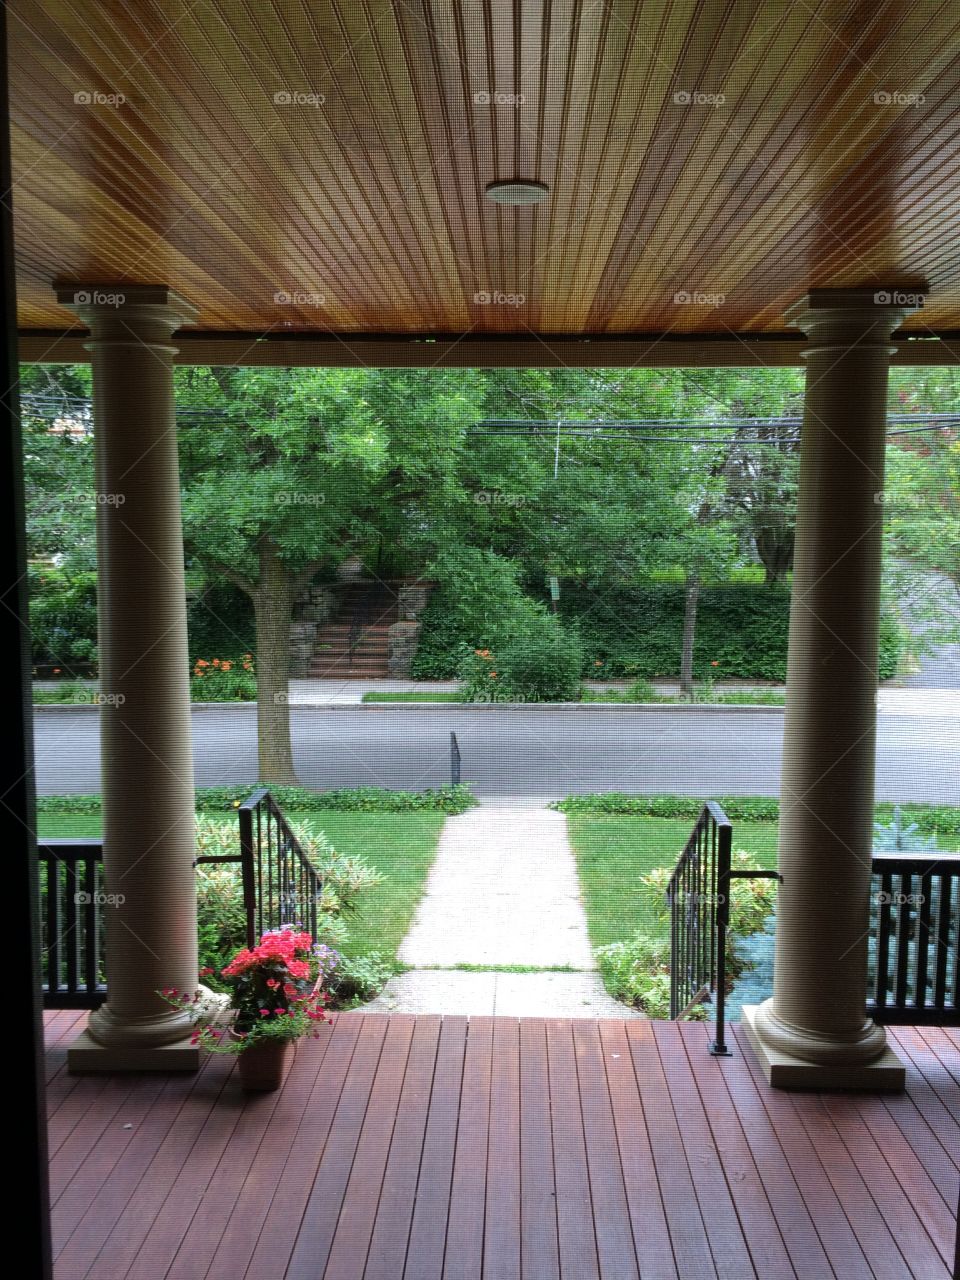 View from a front porch in the summer